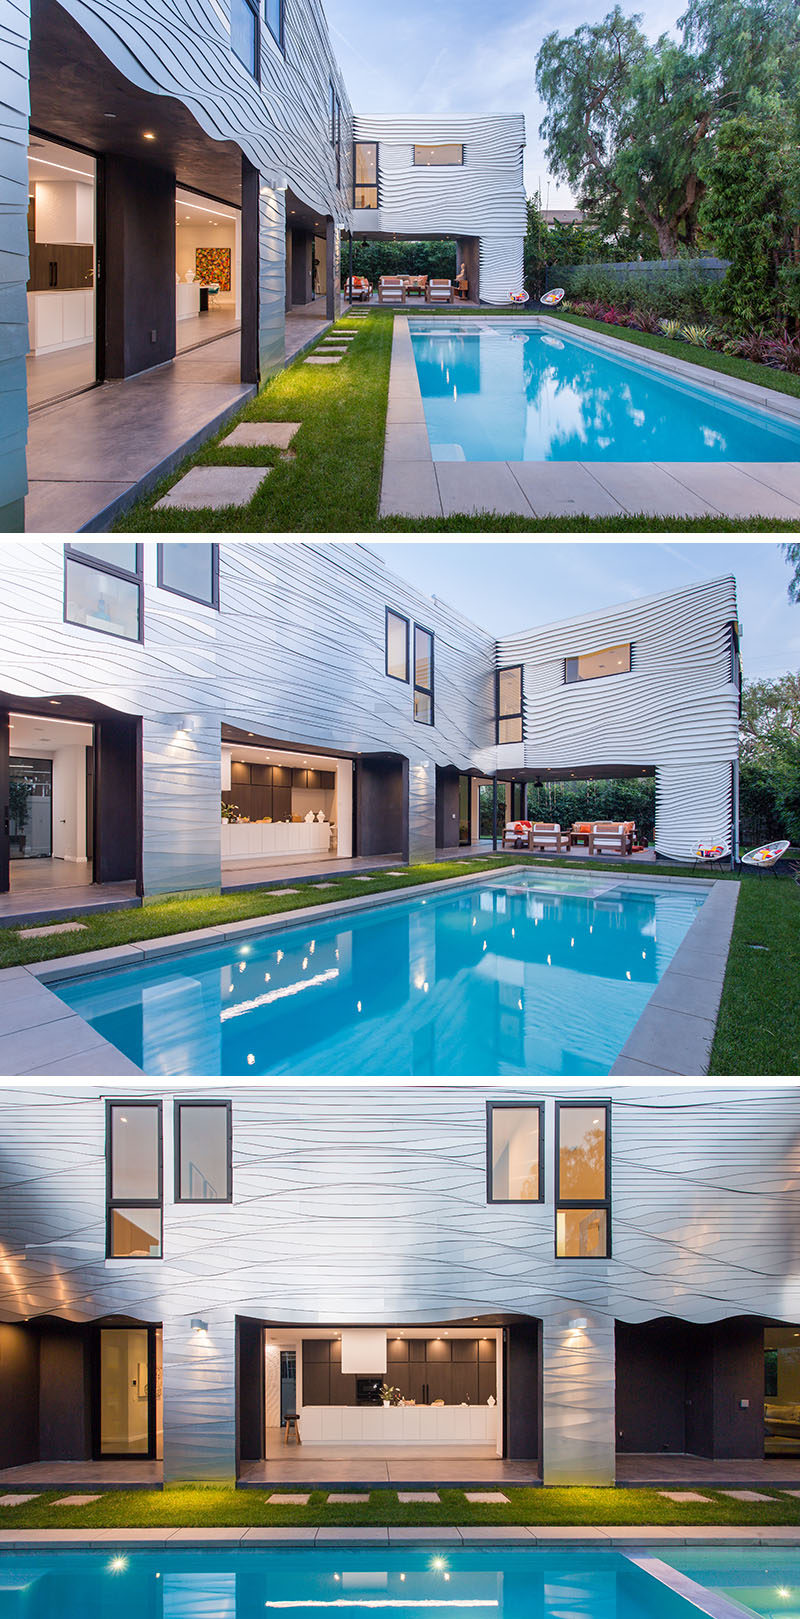 This modern house partially wraps around the swimming pool and many of the interior spaces open up to the outdoors.